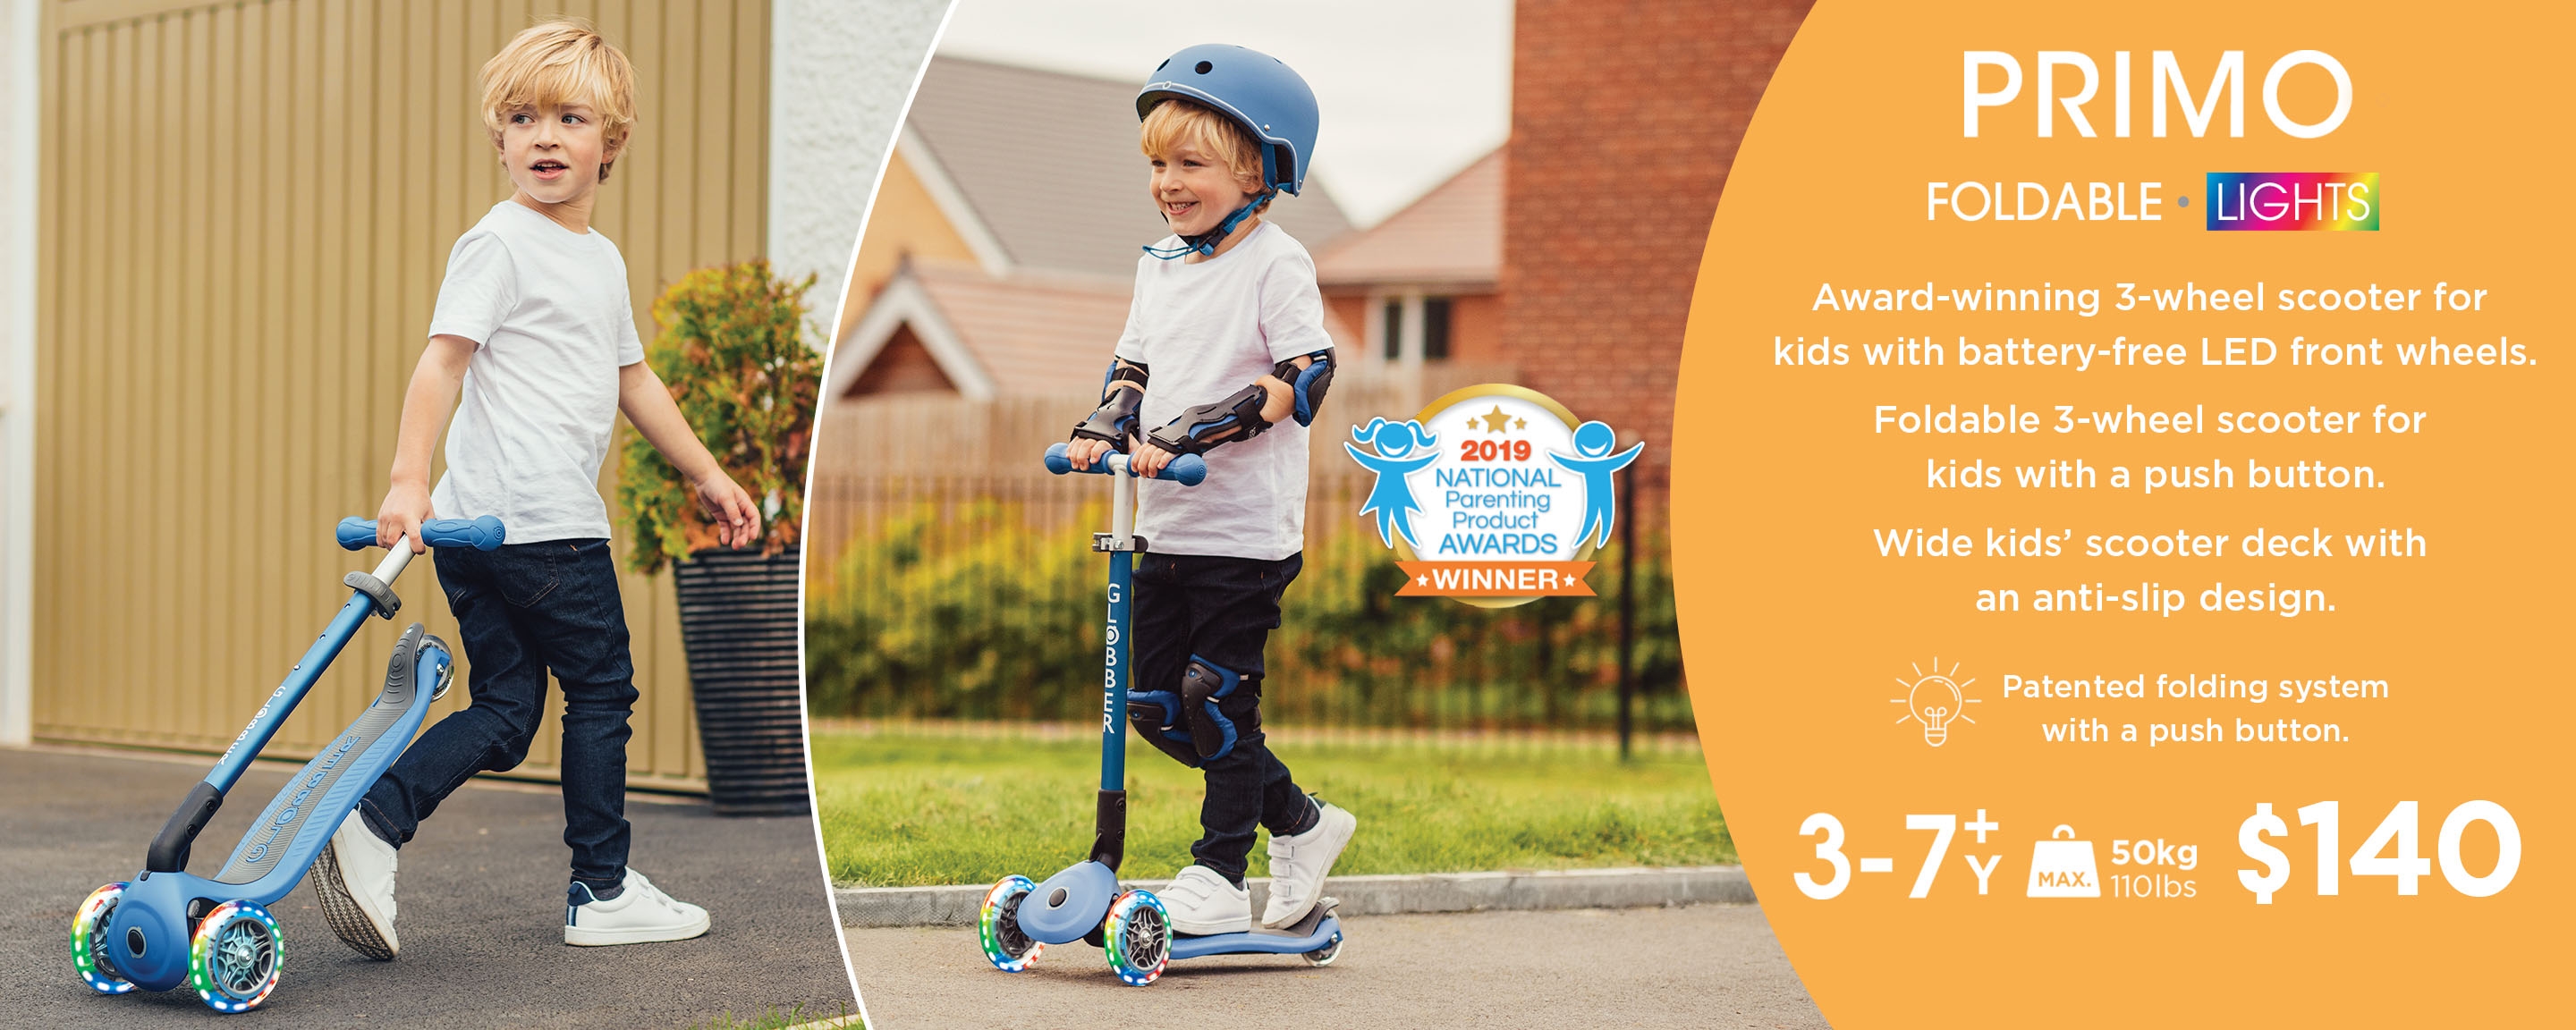 PRIMO FOLDABLE LIGHTS award-winning 3-wheel scooter for kids with LED front wheels